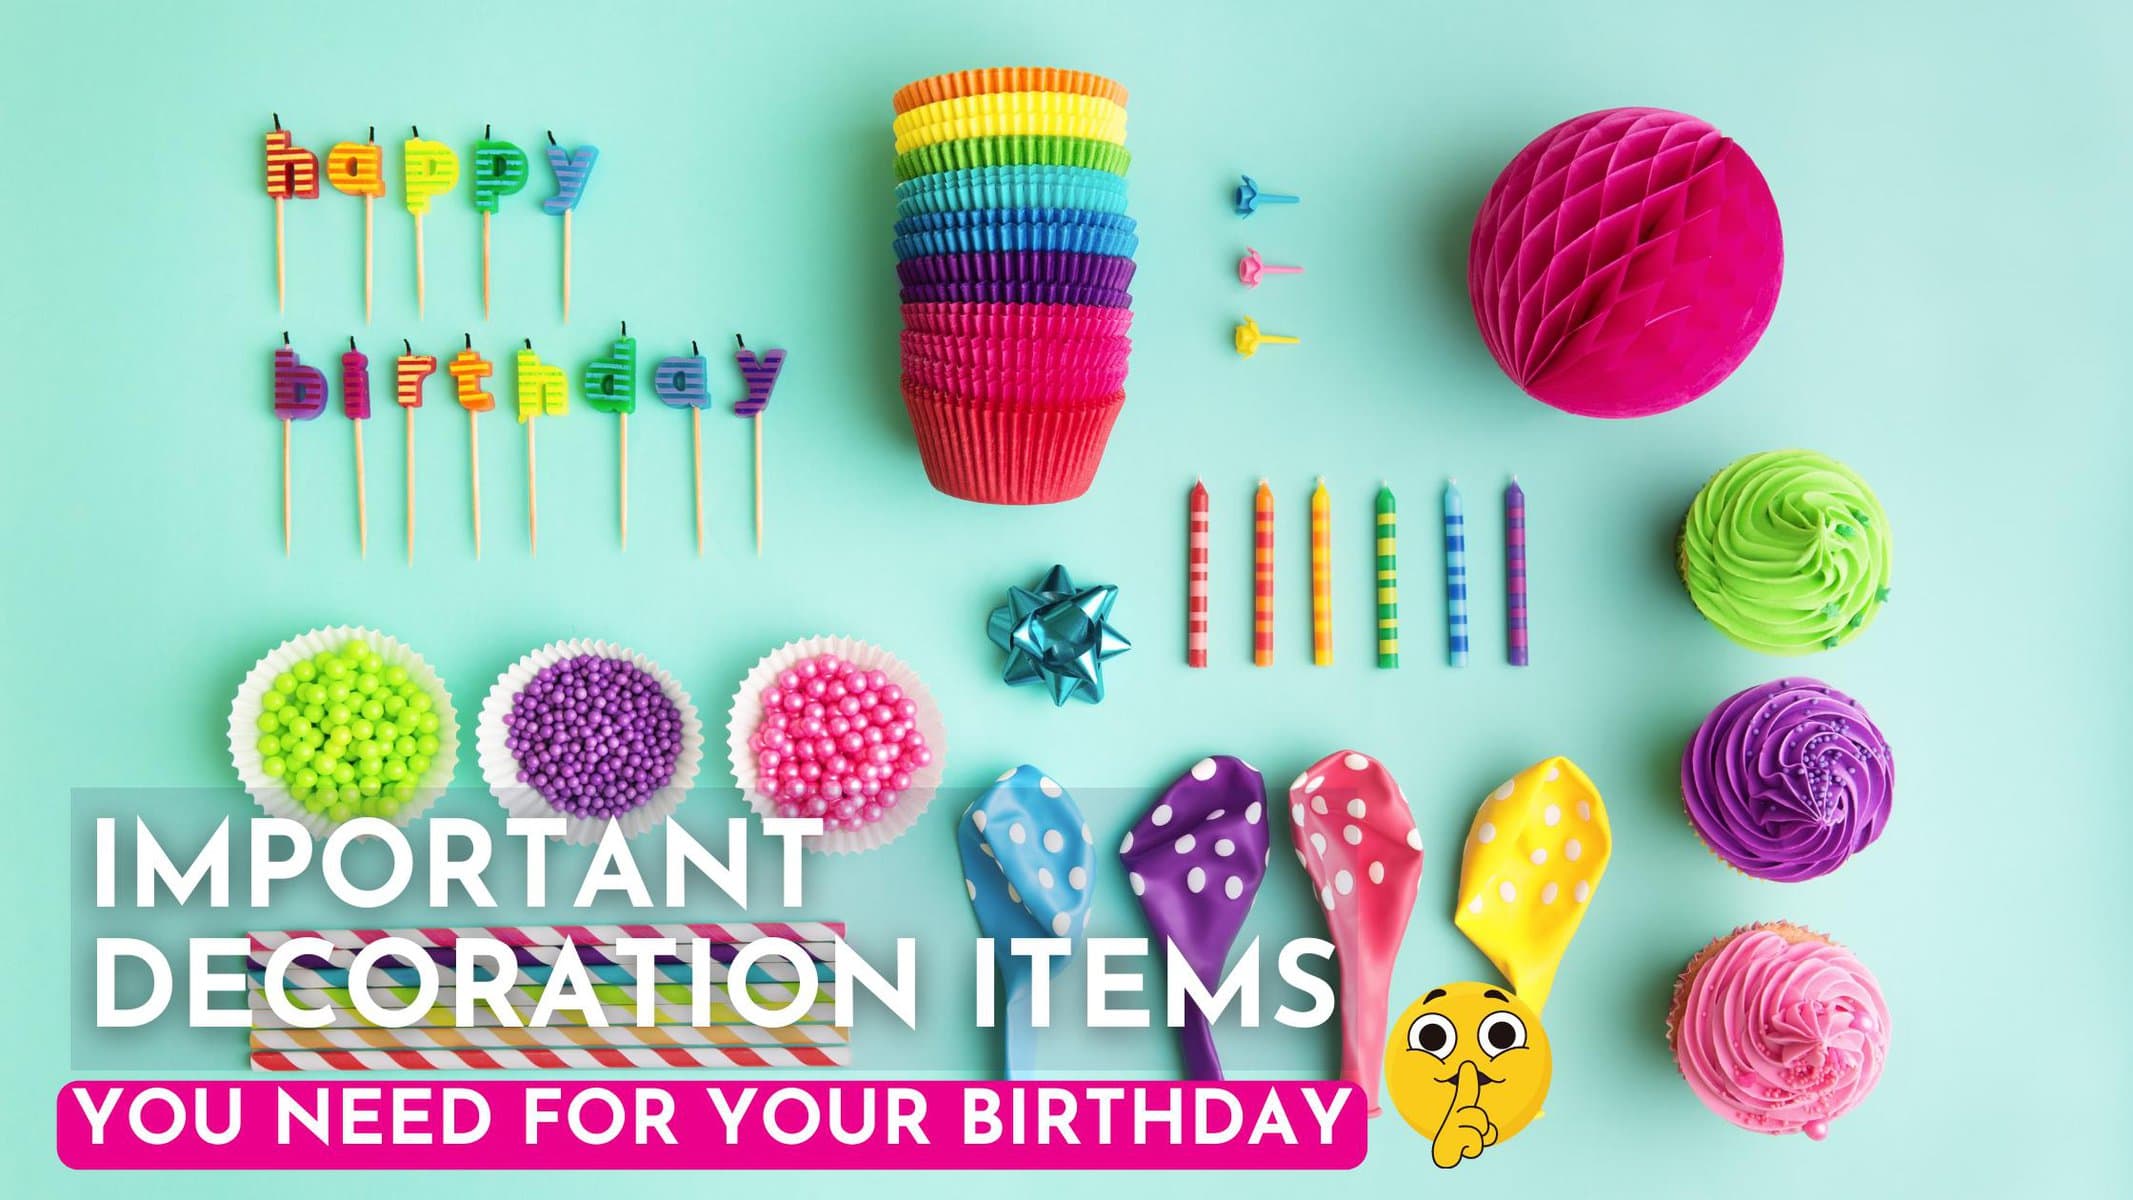 What are the items needed for birthday decoration? 